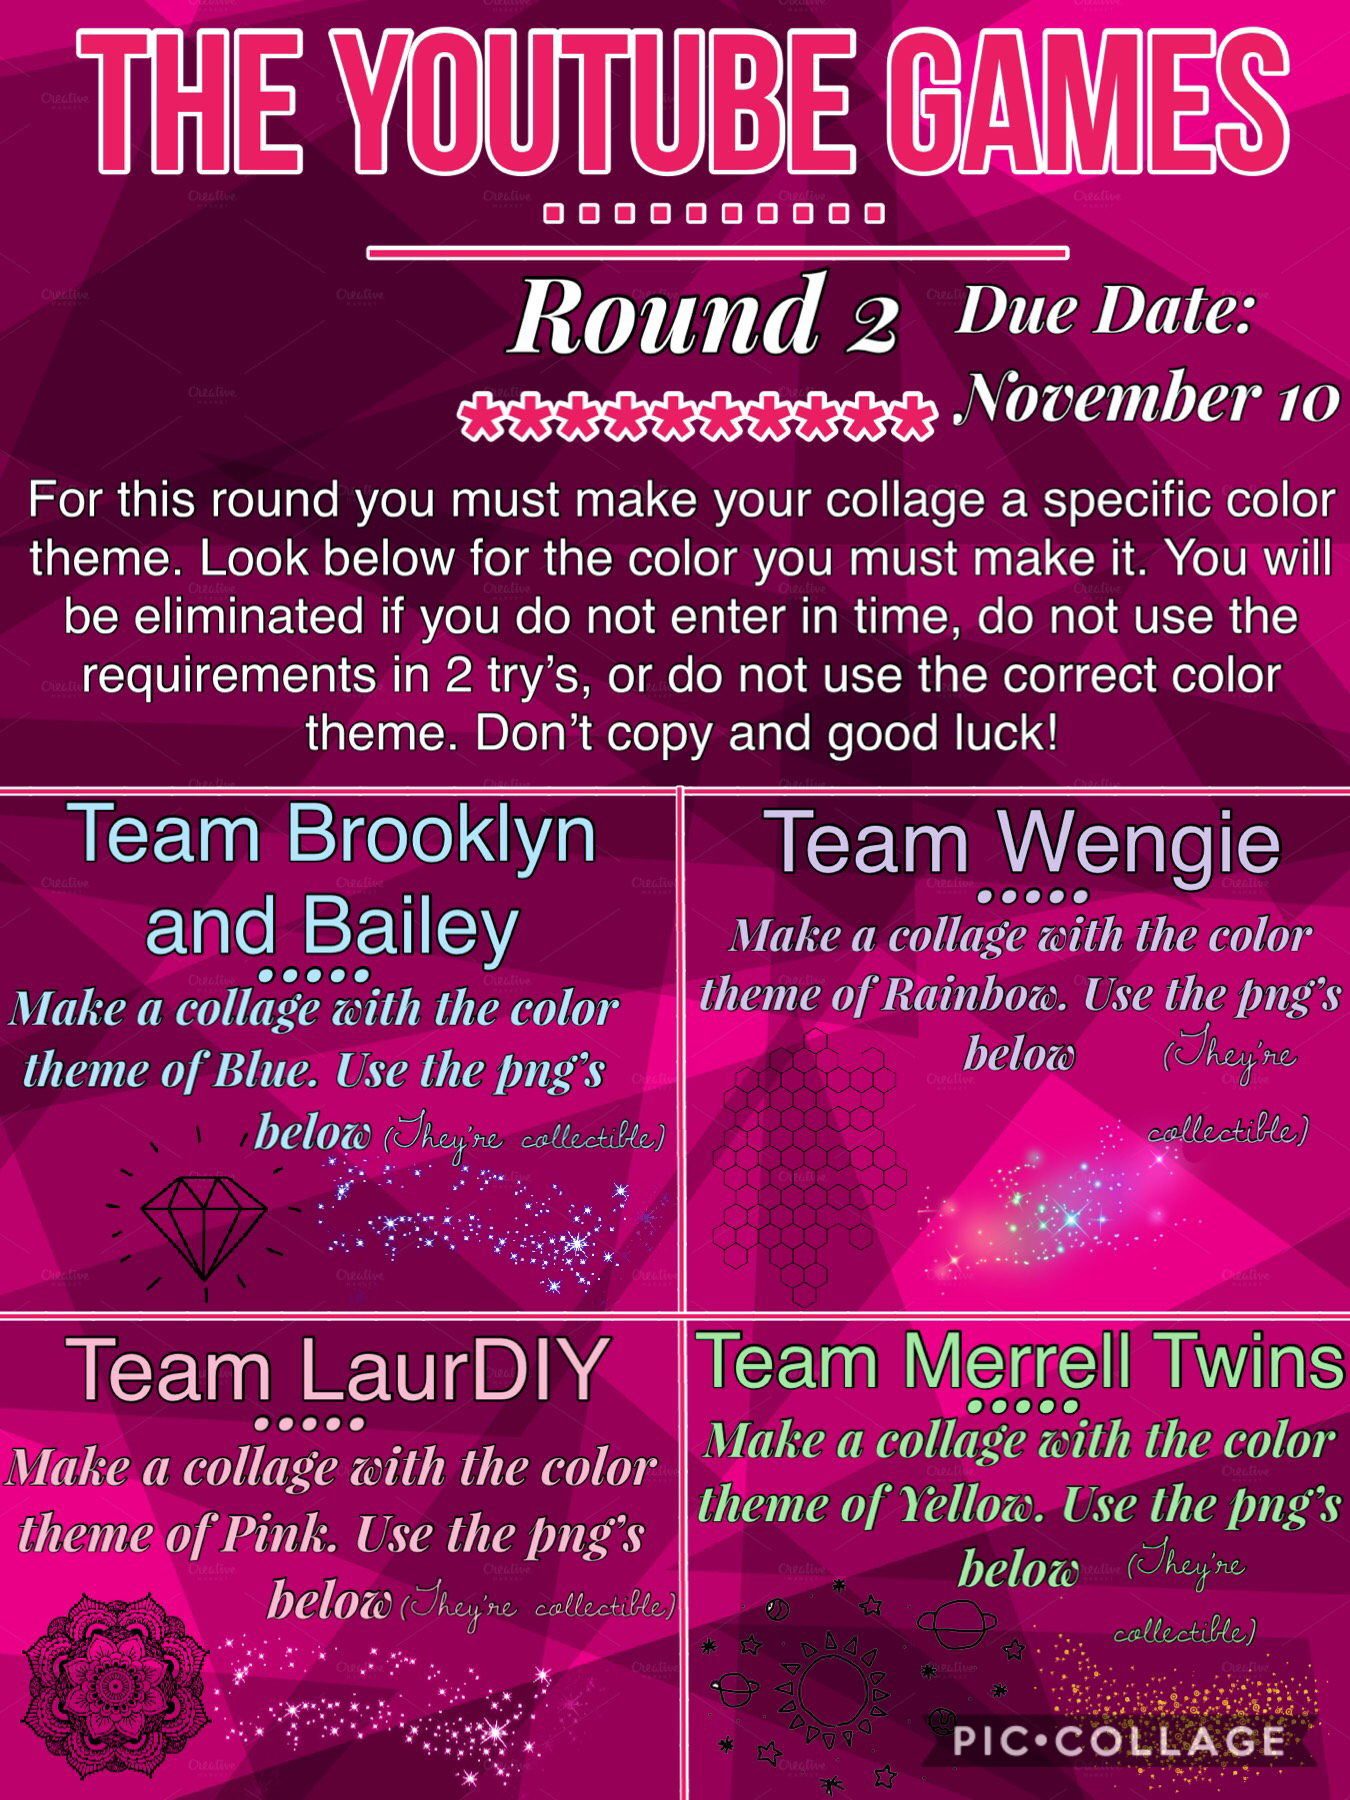 Due on November 10th! You will not be competing if you were eliminated!